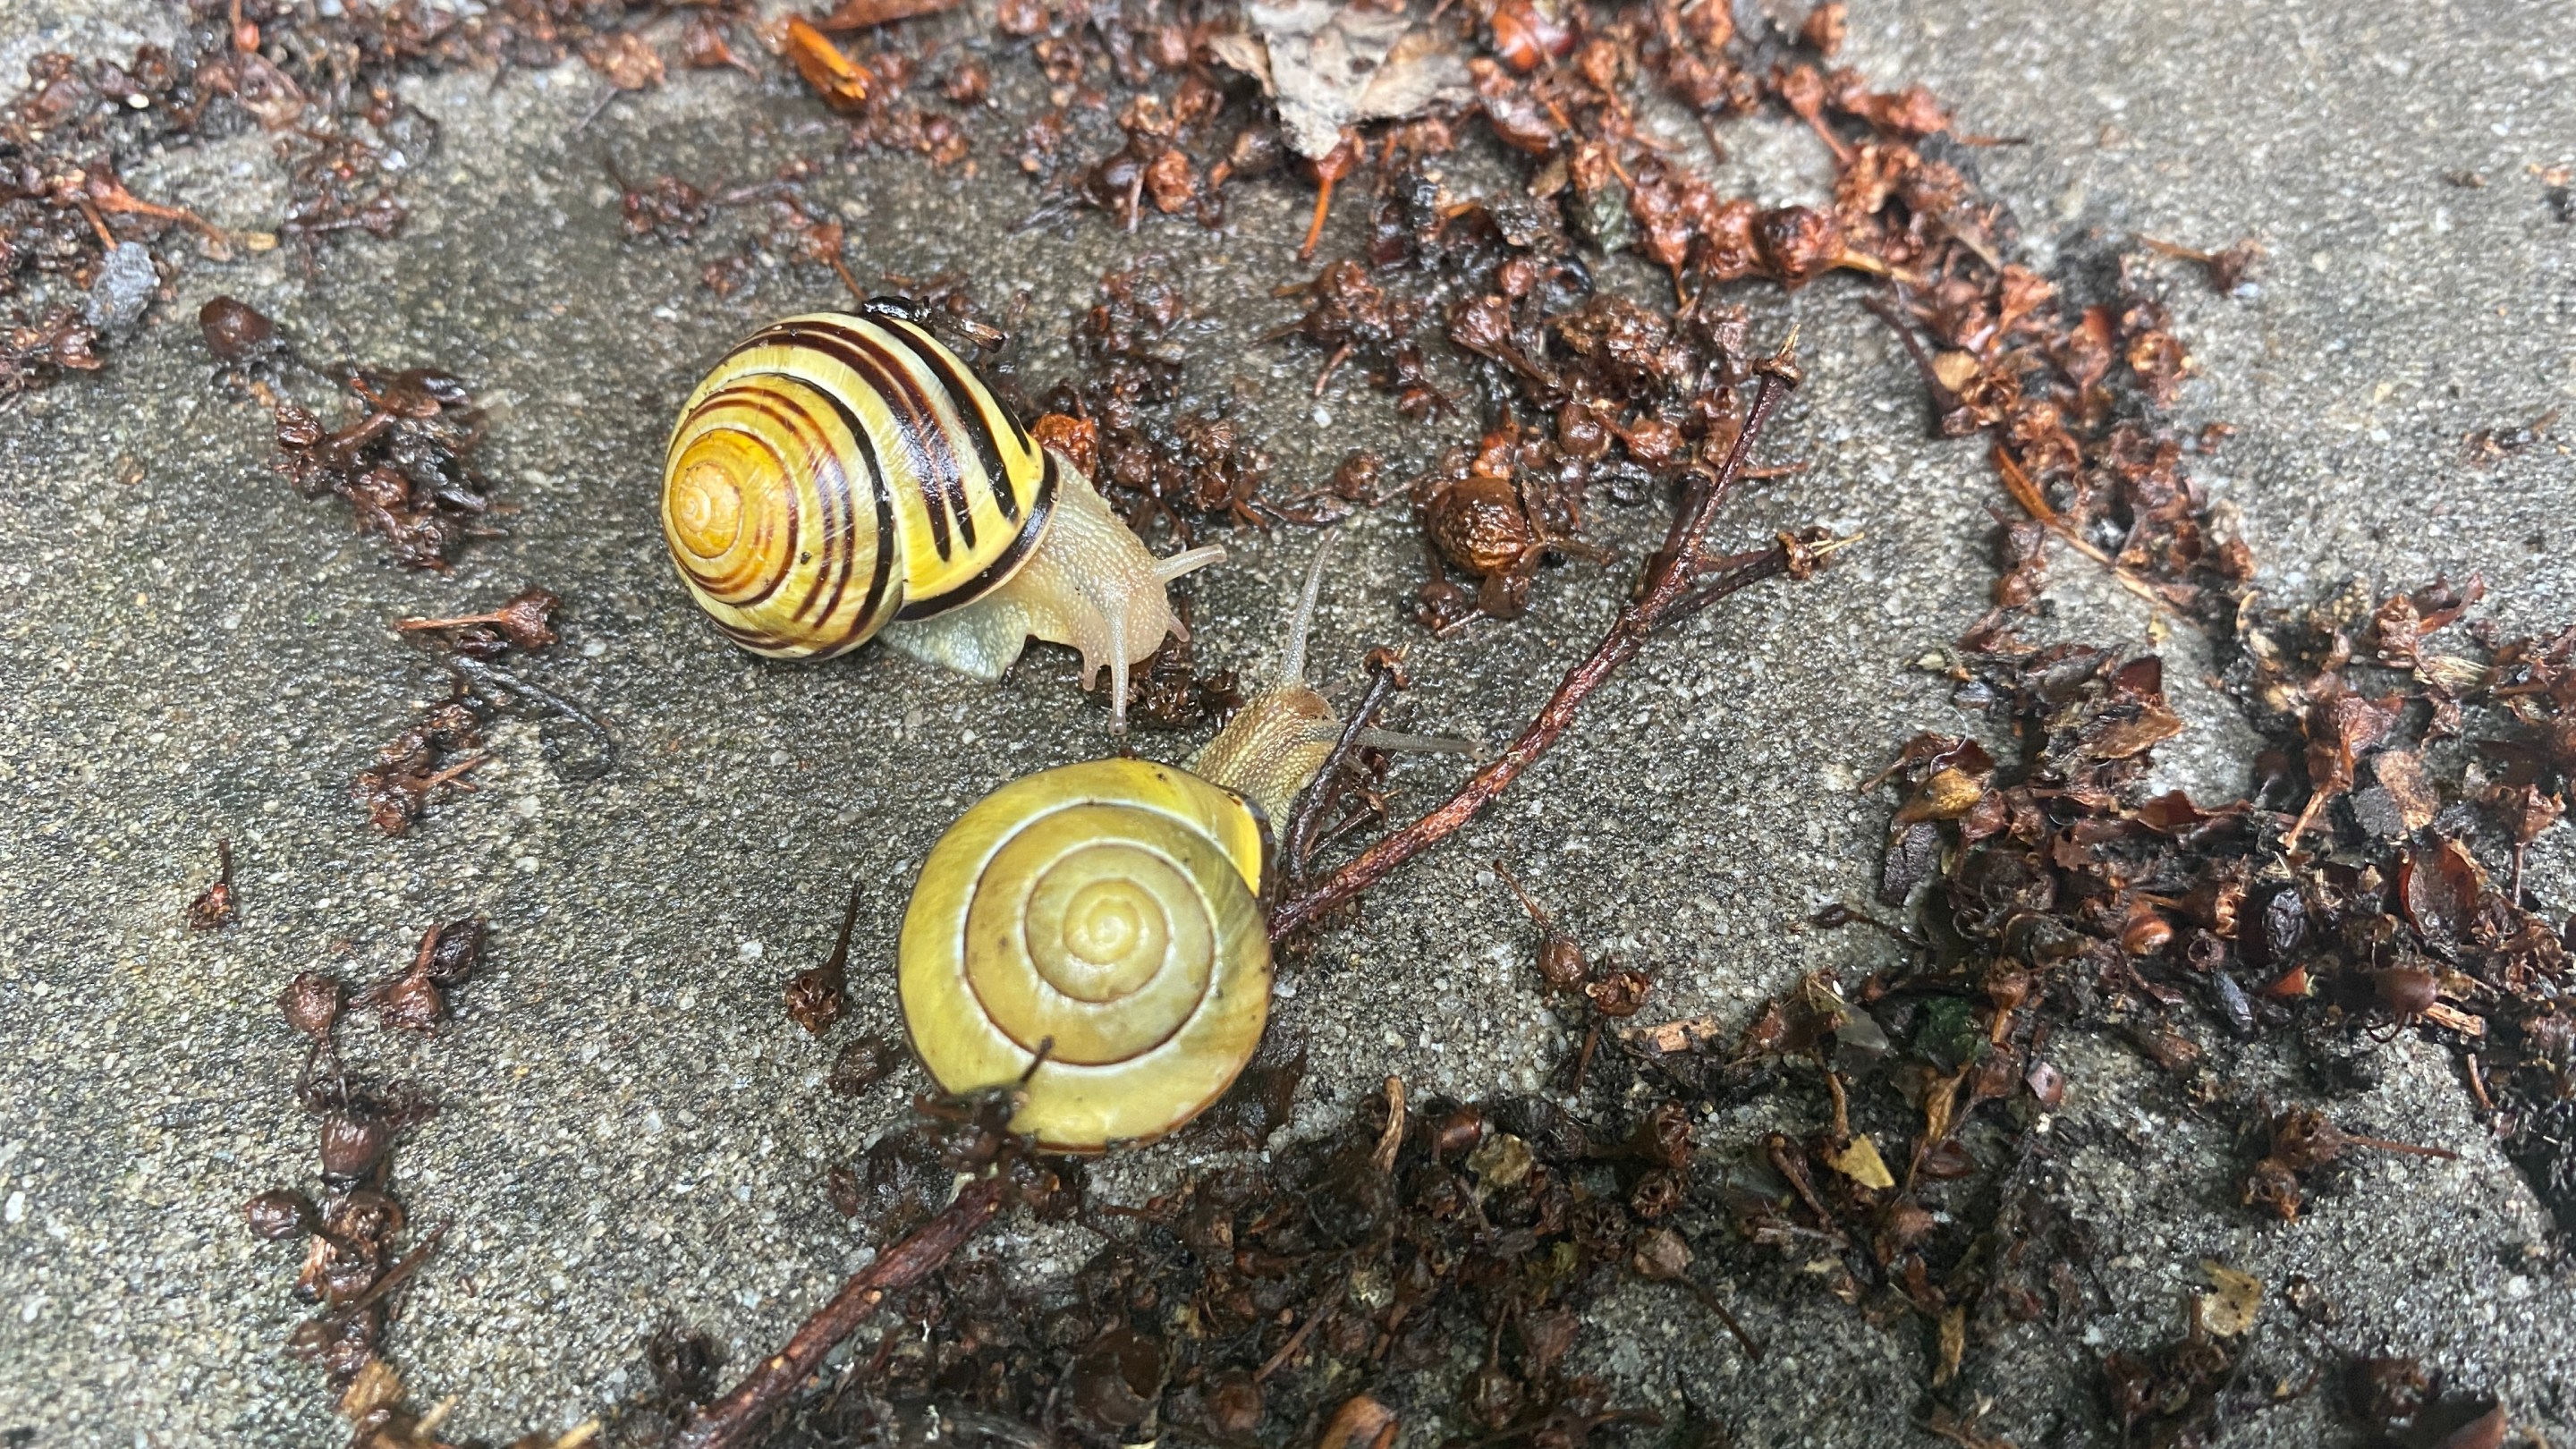 Two brown-lipped snails, cepea nemoralis, on the concrete.